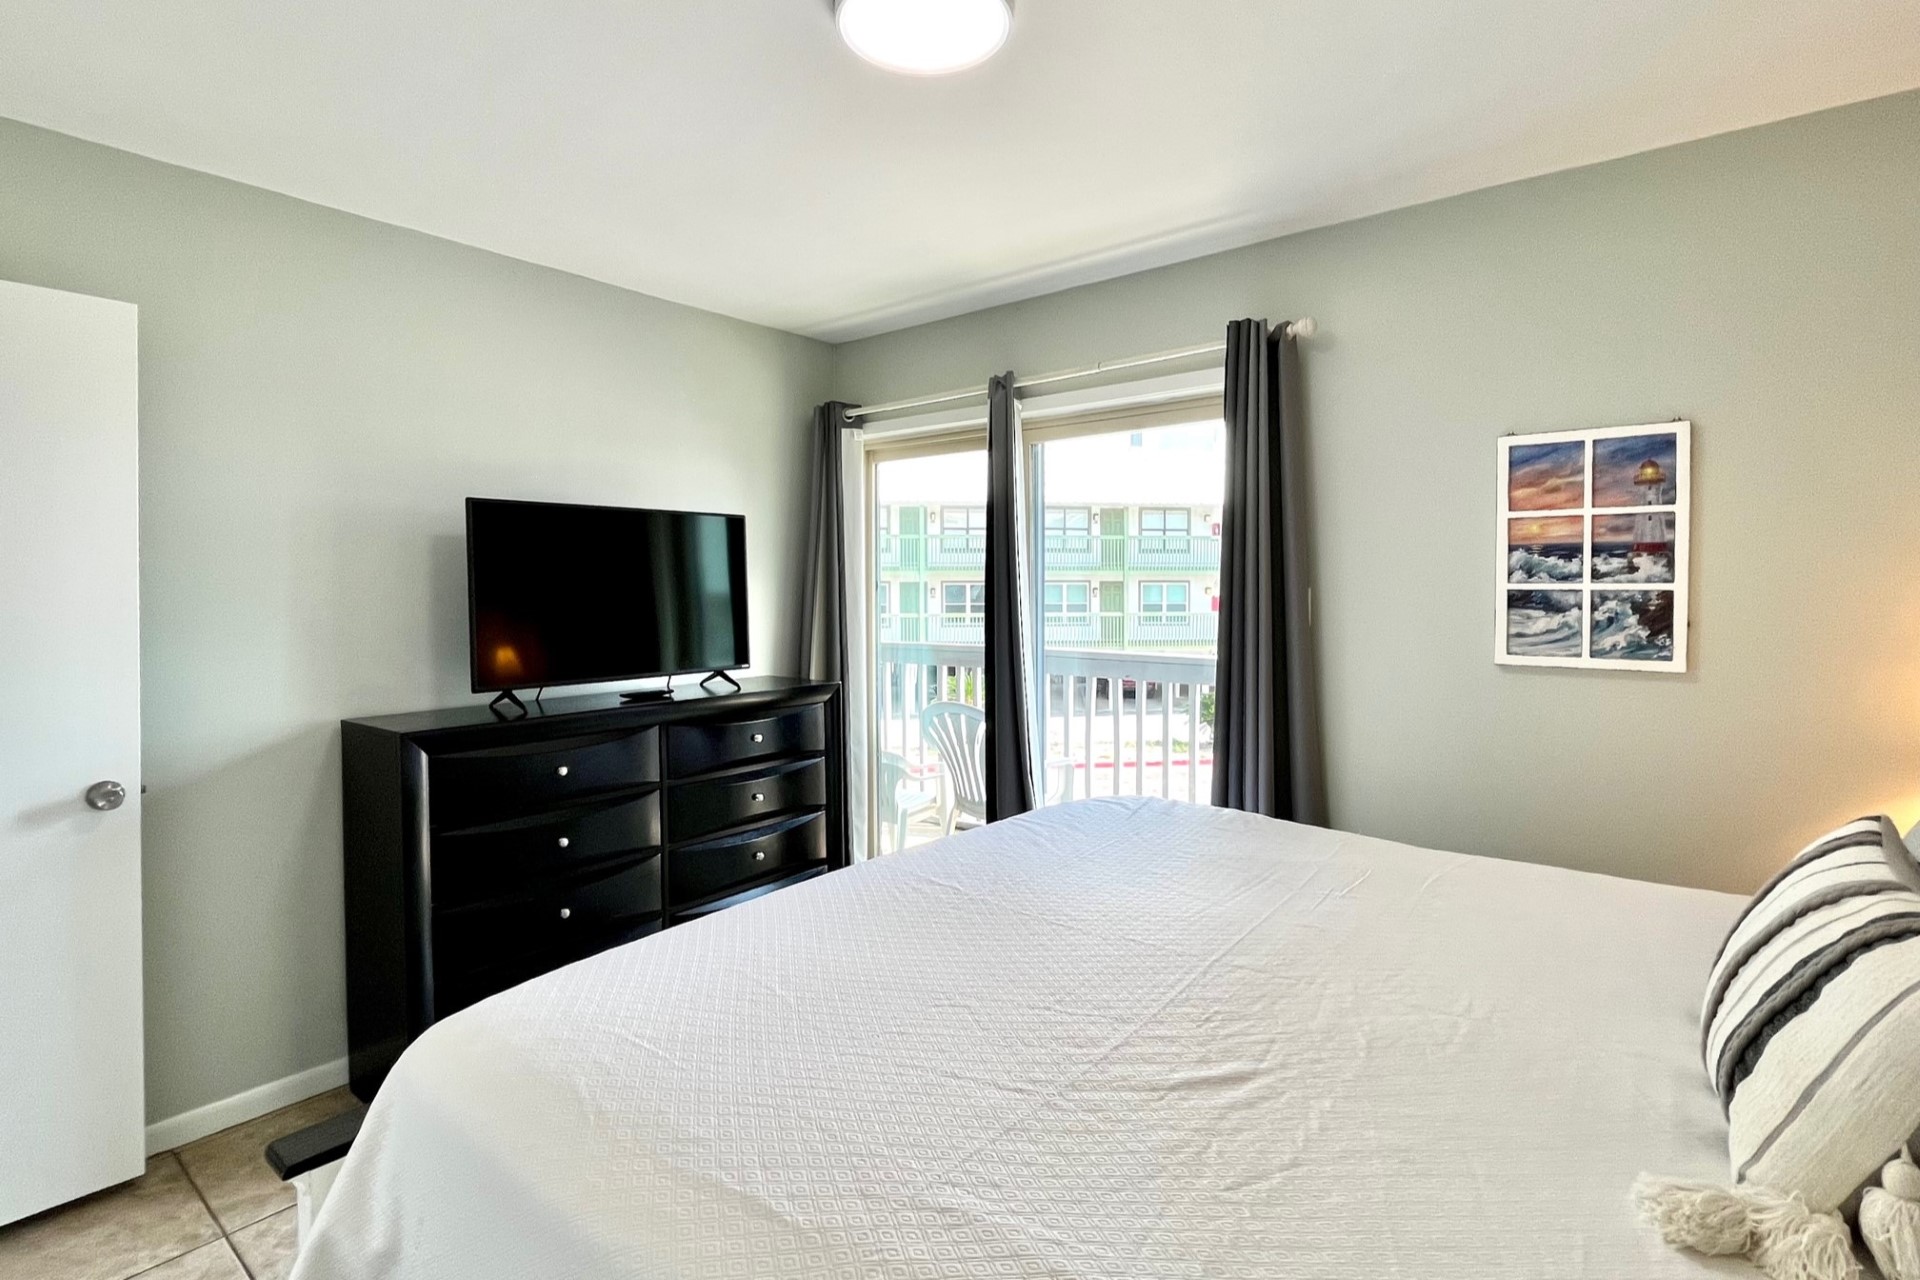 The master bedroom is outfitted with a king-size bed, 32